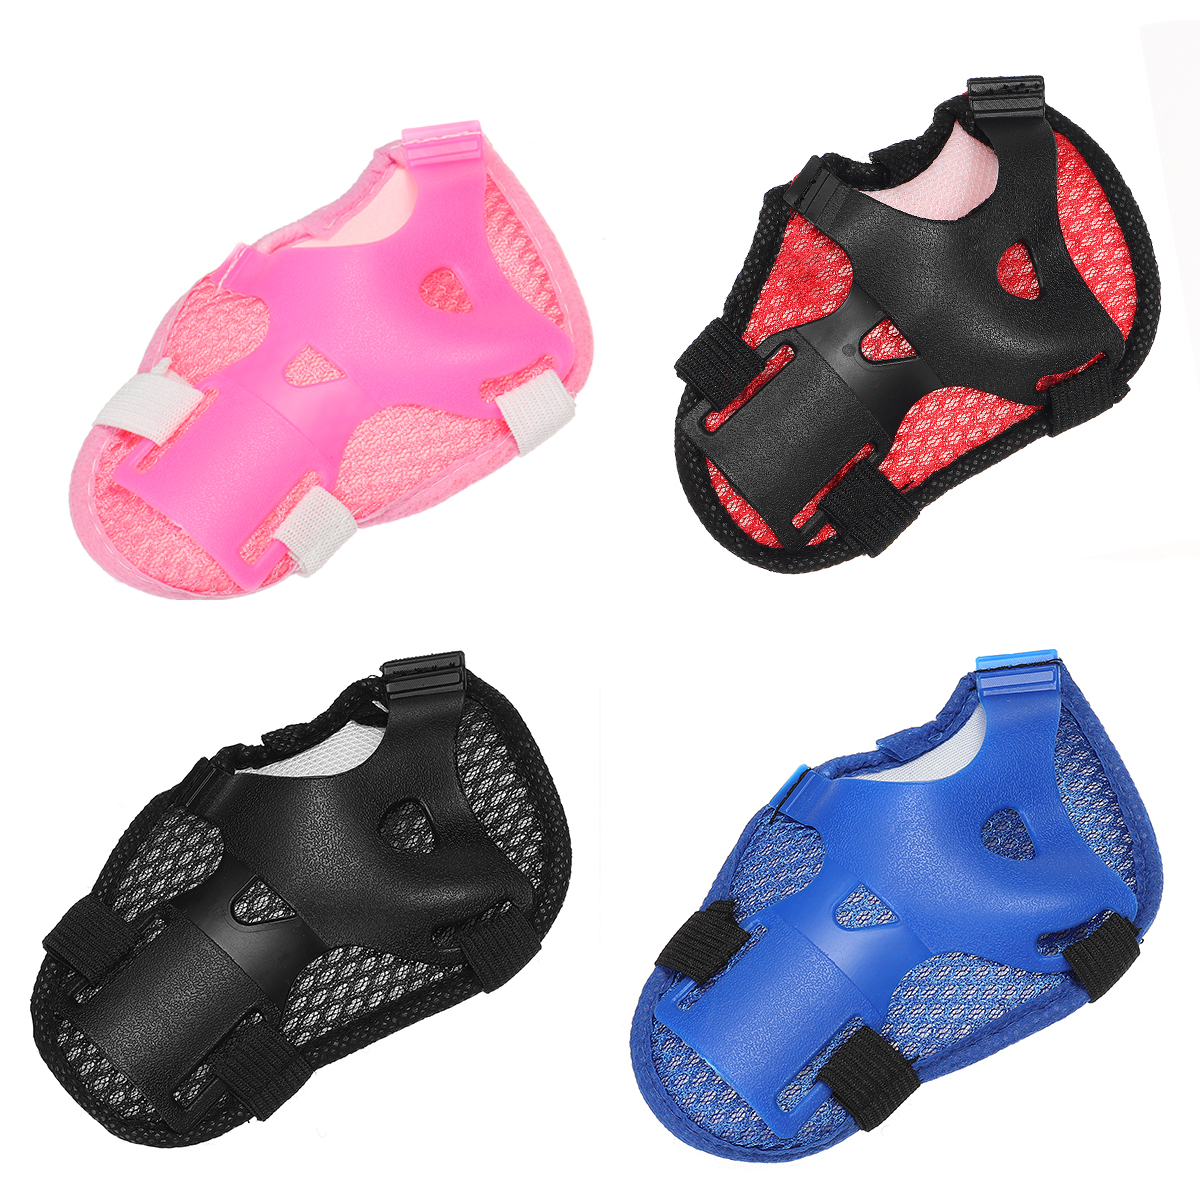 6PcsSet-Children-Skating-Bike-Protective-Gear-Sets-Knee-Elbow-Pads-Bicycle-Skateboard-Ice-Skating-Ro-1703315-2